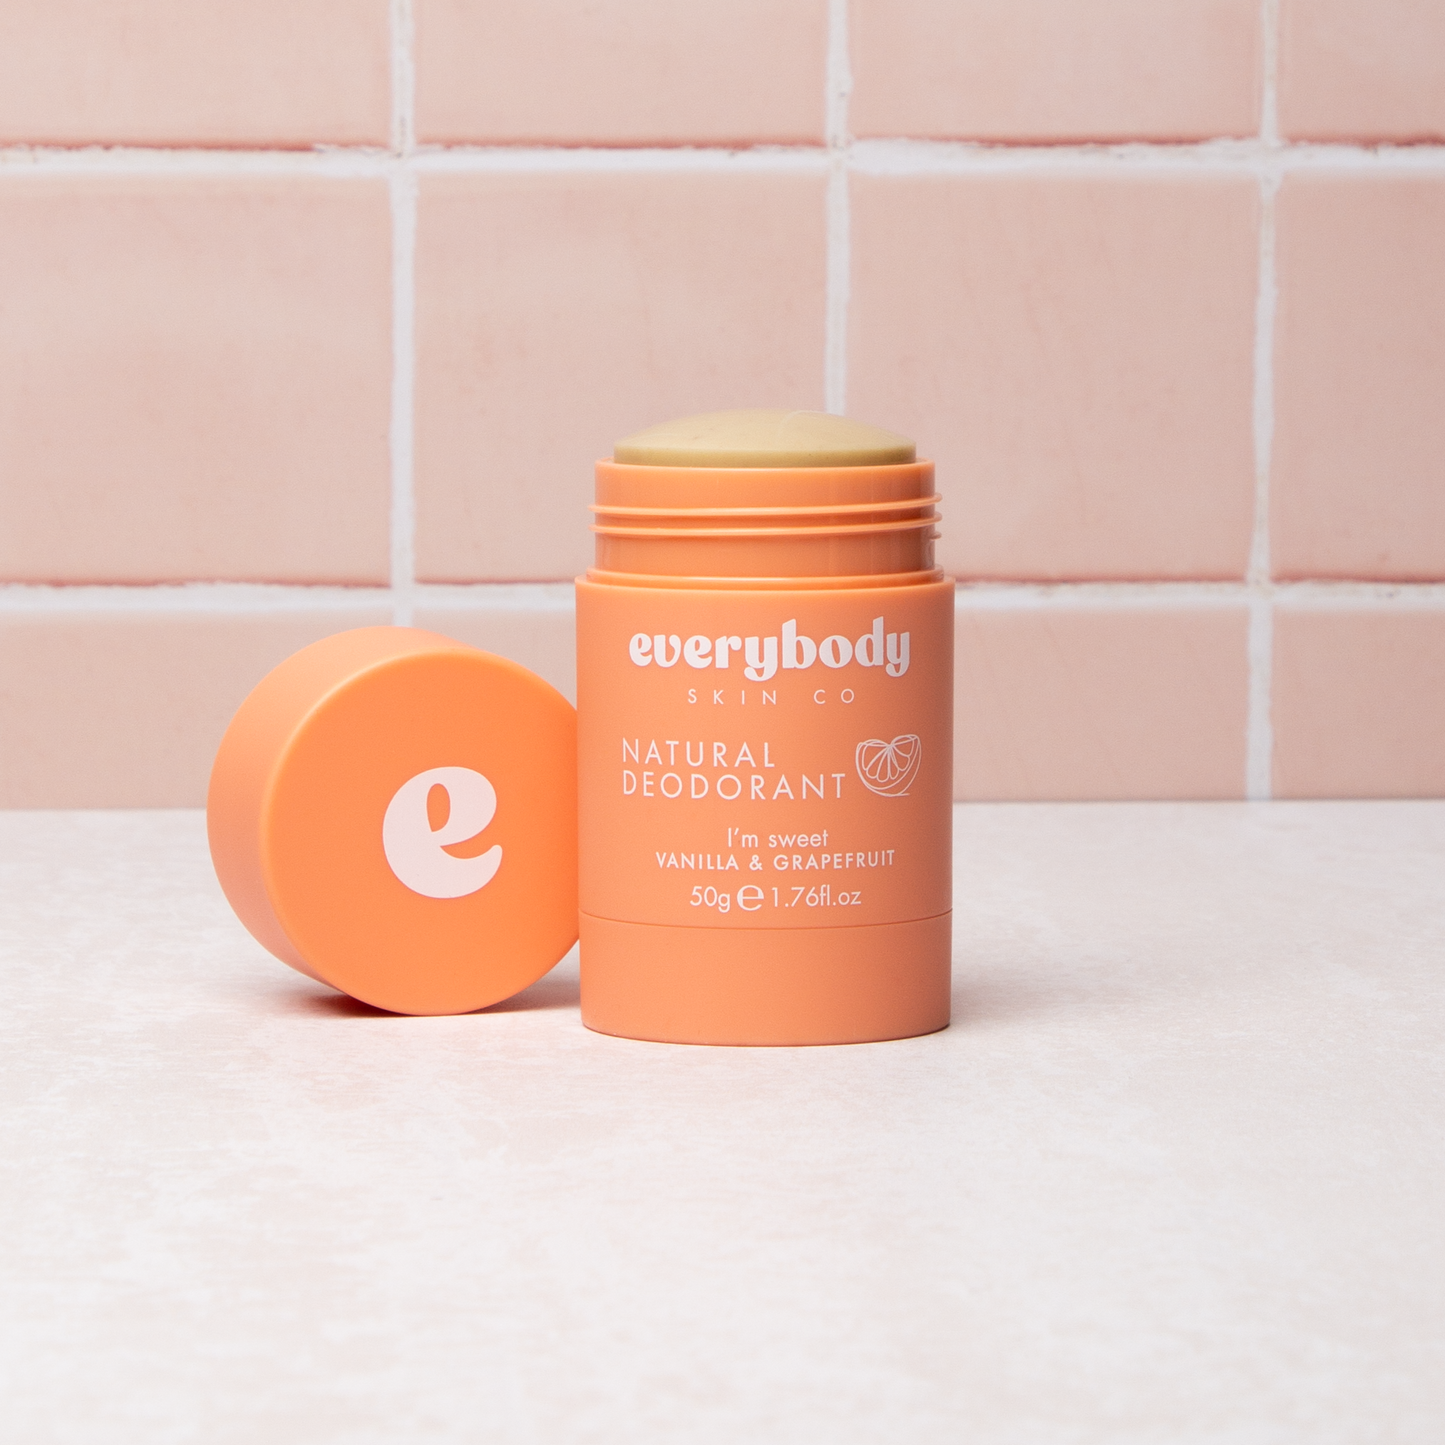 Natural Deodorant in refillable container